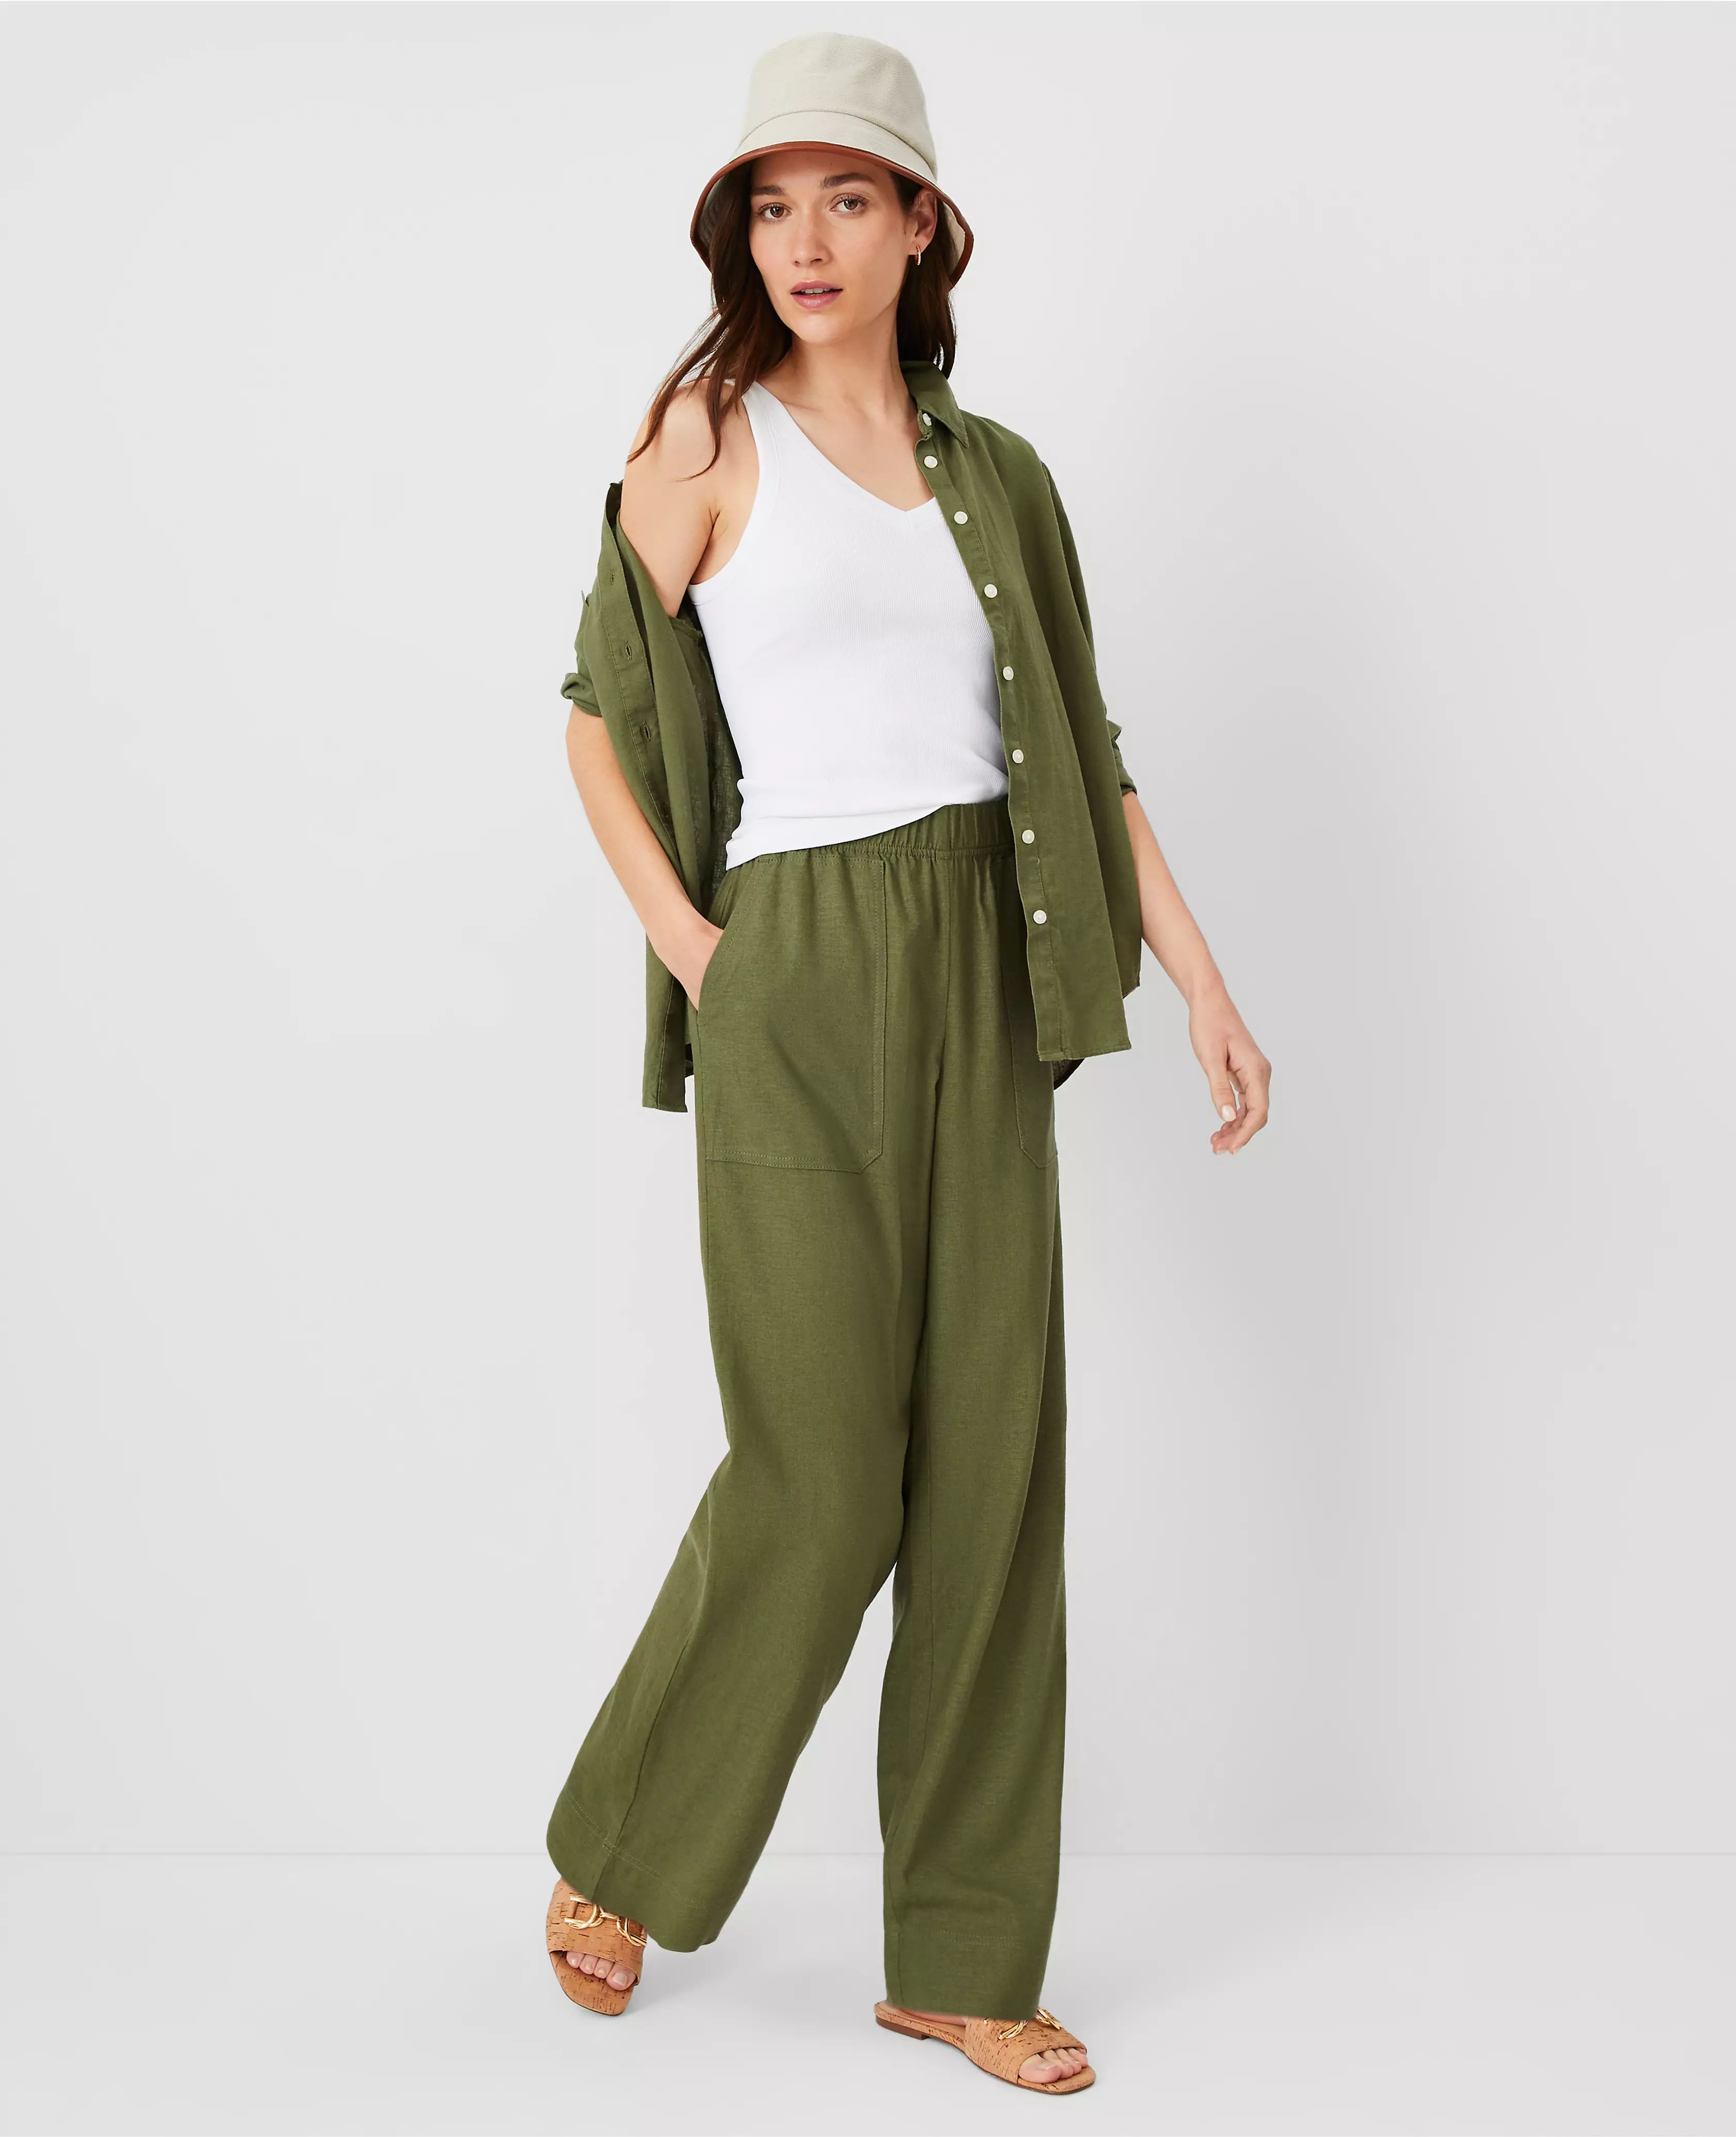 AT Weekend Easy Straight Leg Pants in Linen Blend | Ann Taylor (US)